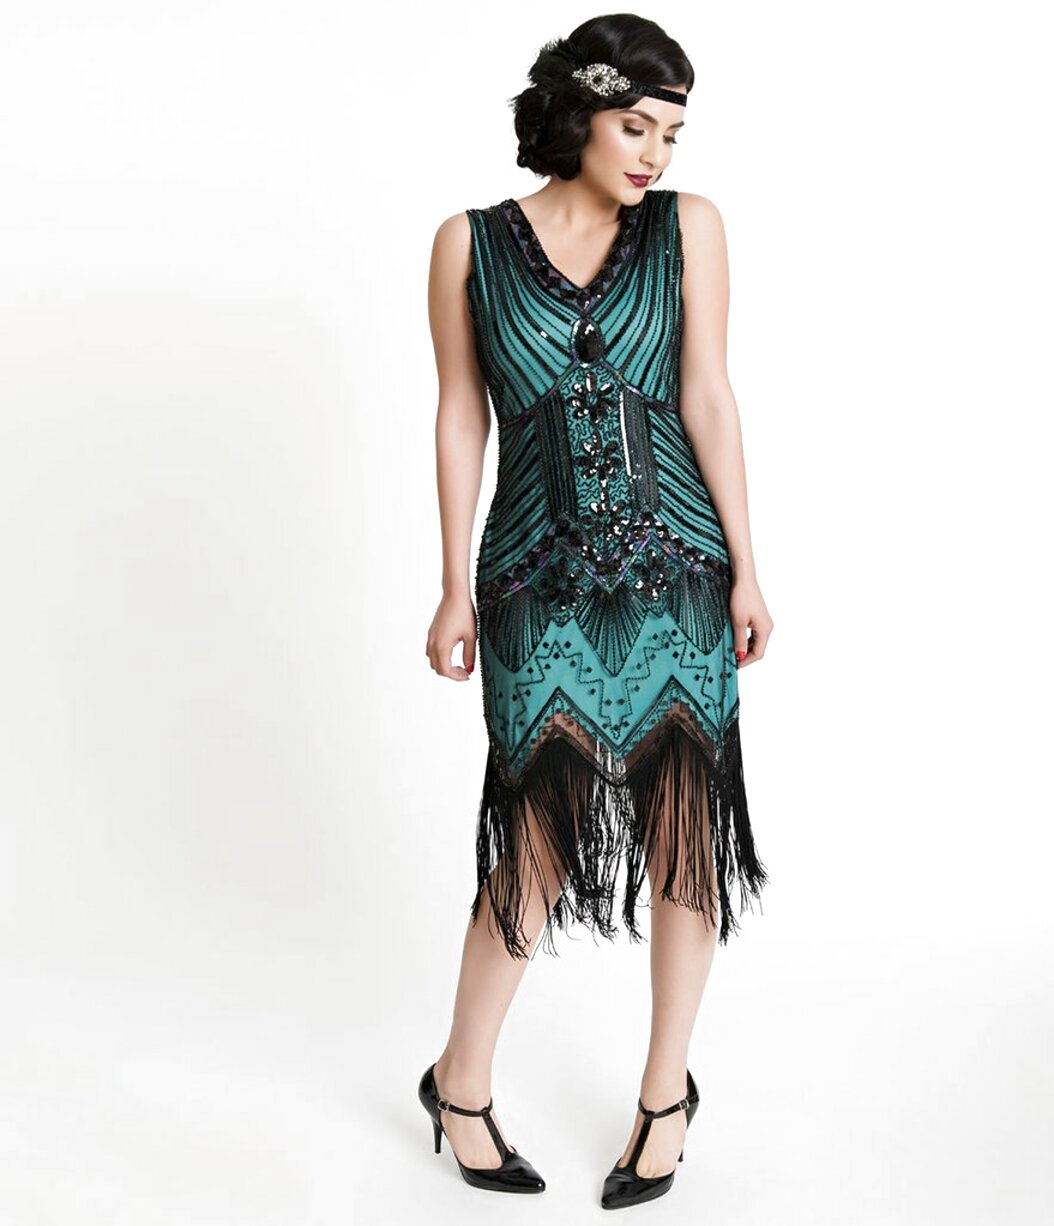 Teal Flapper Dress for sale in UK | View 60 bargains